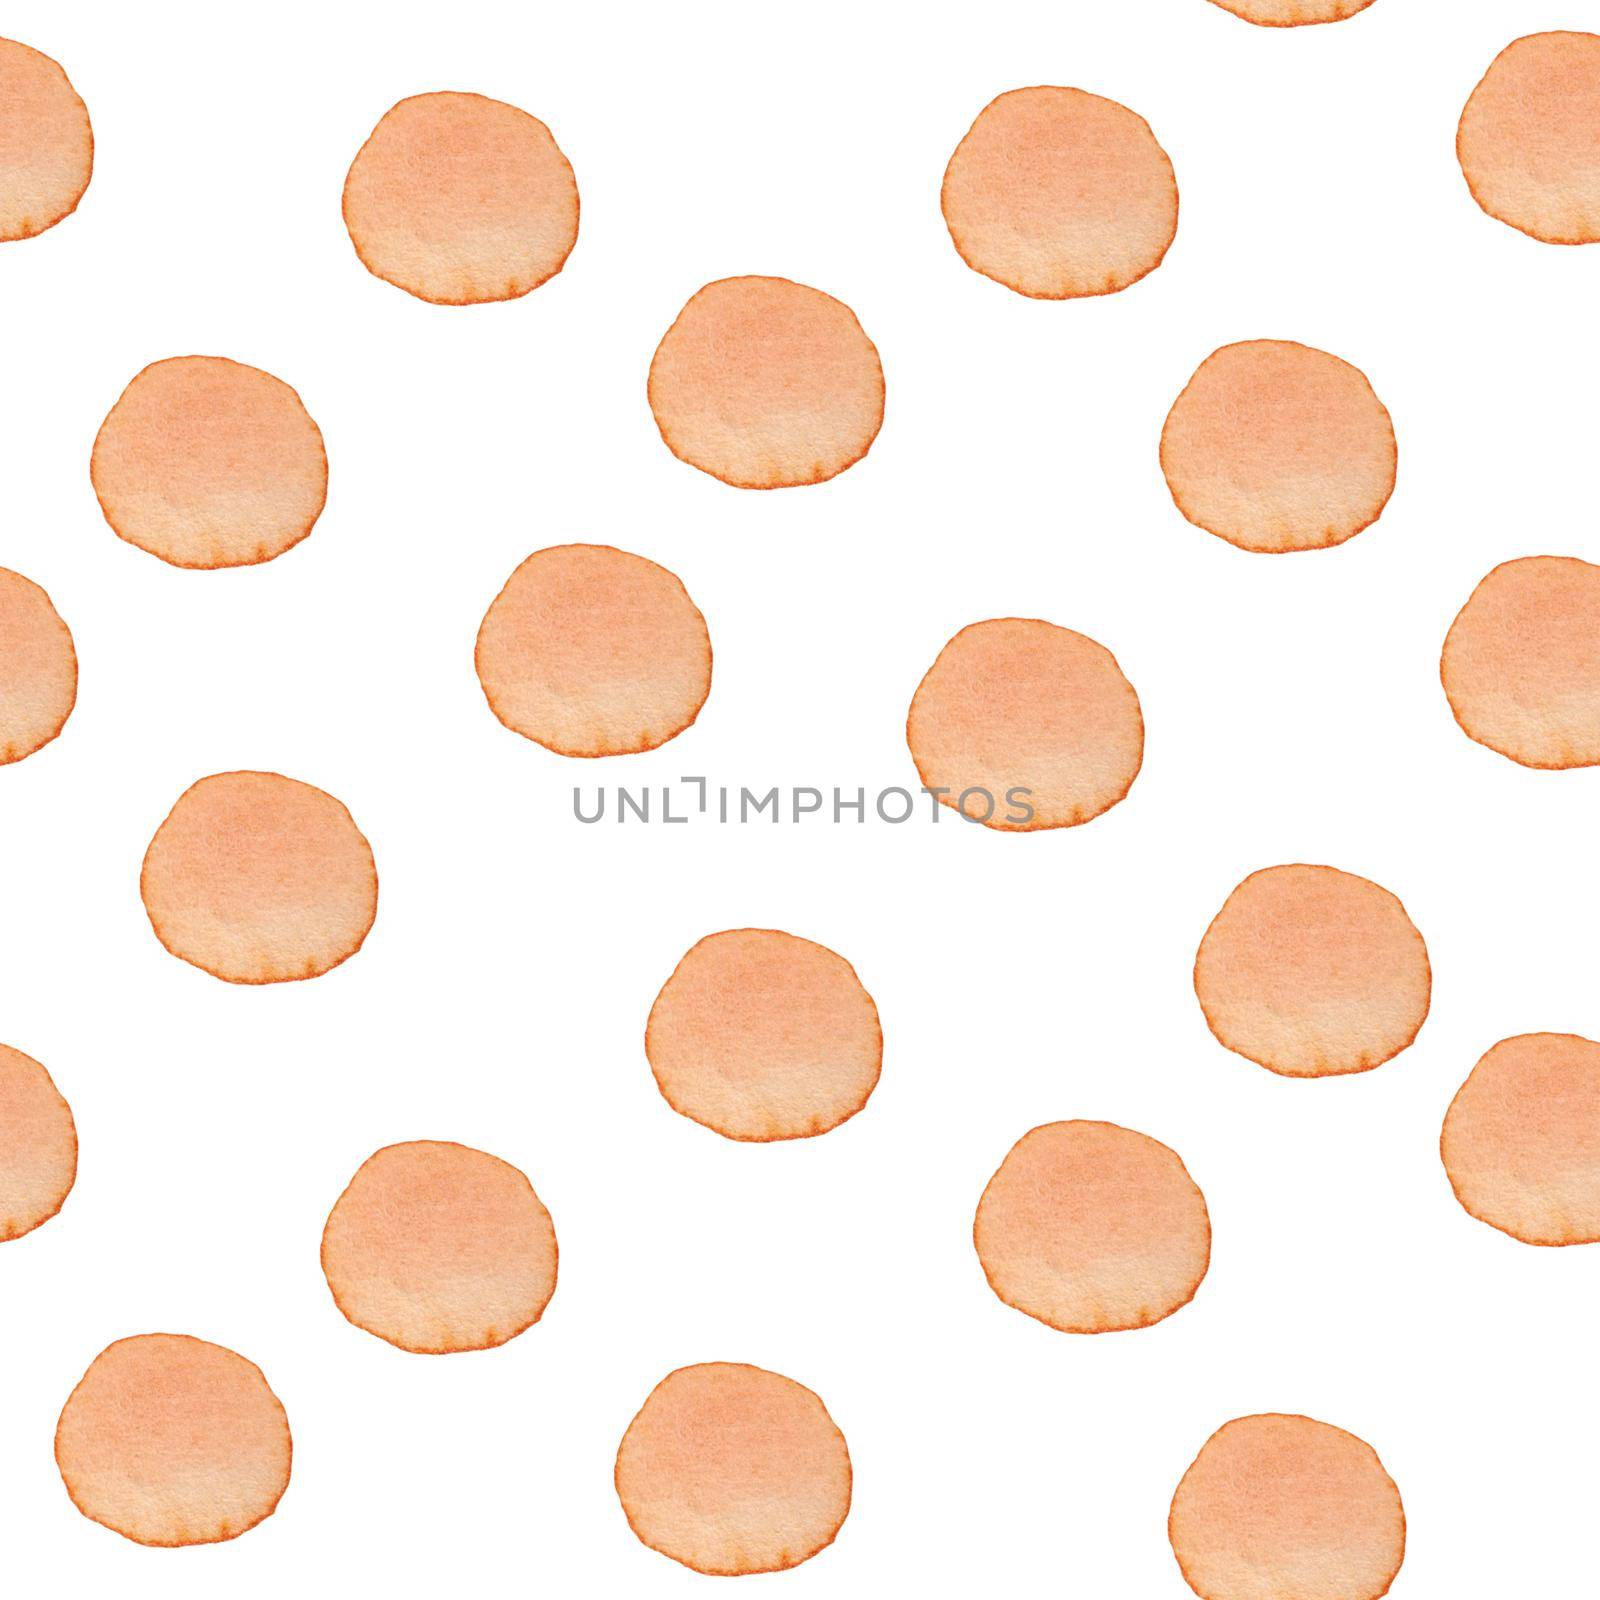 Hand Painted Brush Polka Dot Seamless Watercolor Pattern. Abstract watercolour Round Circles in Orange Color. Artistic Design for Fabric and Background by DesignAB